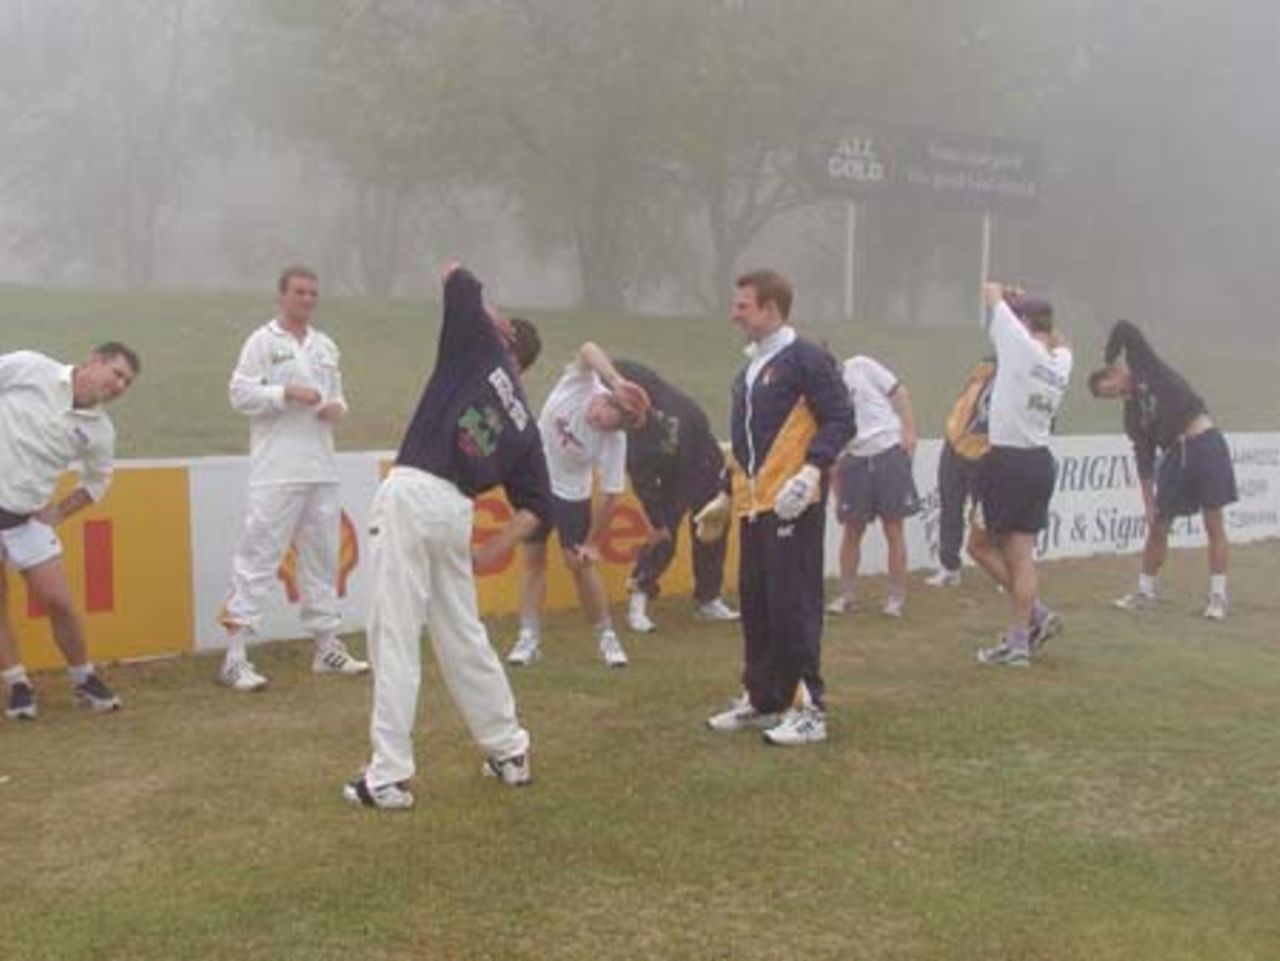 Hampshire players doing stretching excersises waiting for the early morning fog to lift